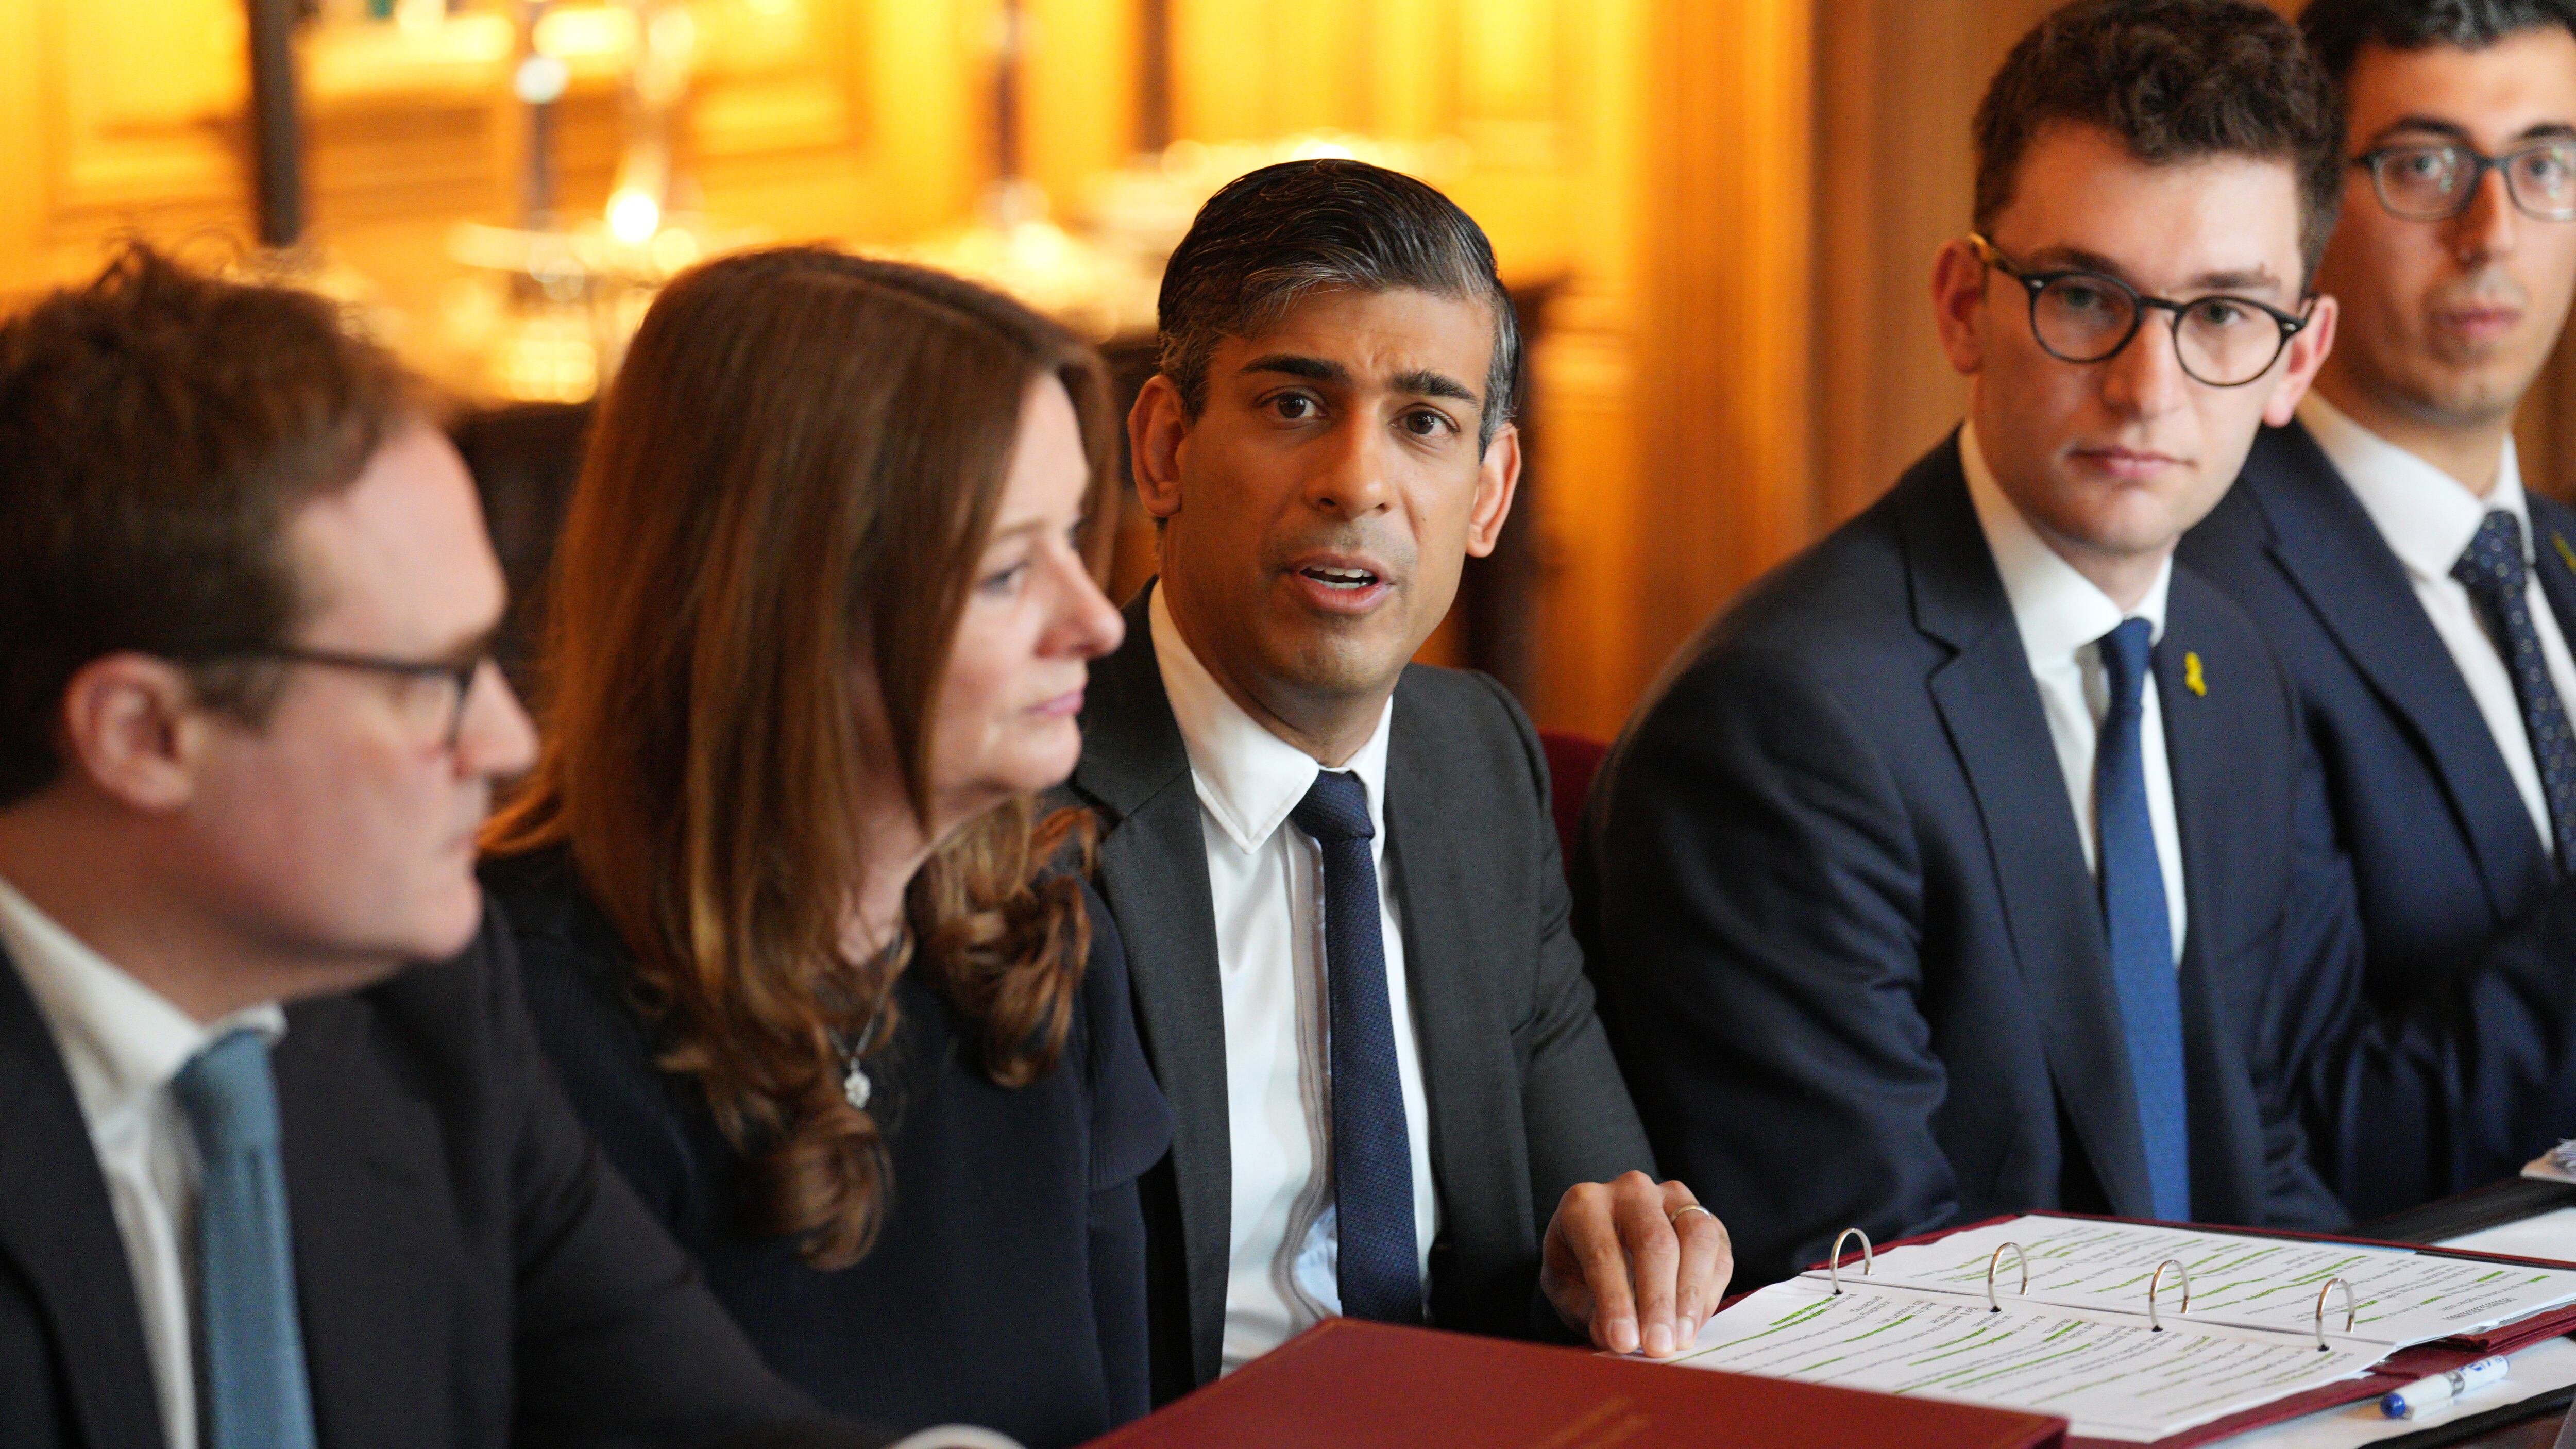 Prime Minister Rishi Sunak chairs a meeting with vice chancellors from some of the country’s leading universities and representatives from the Union of Jewish Students in Downing Street, London, to discuss efforts to tackle antisemitism on campus and protect Jewish students